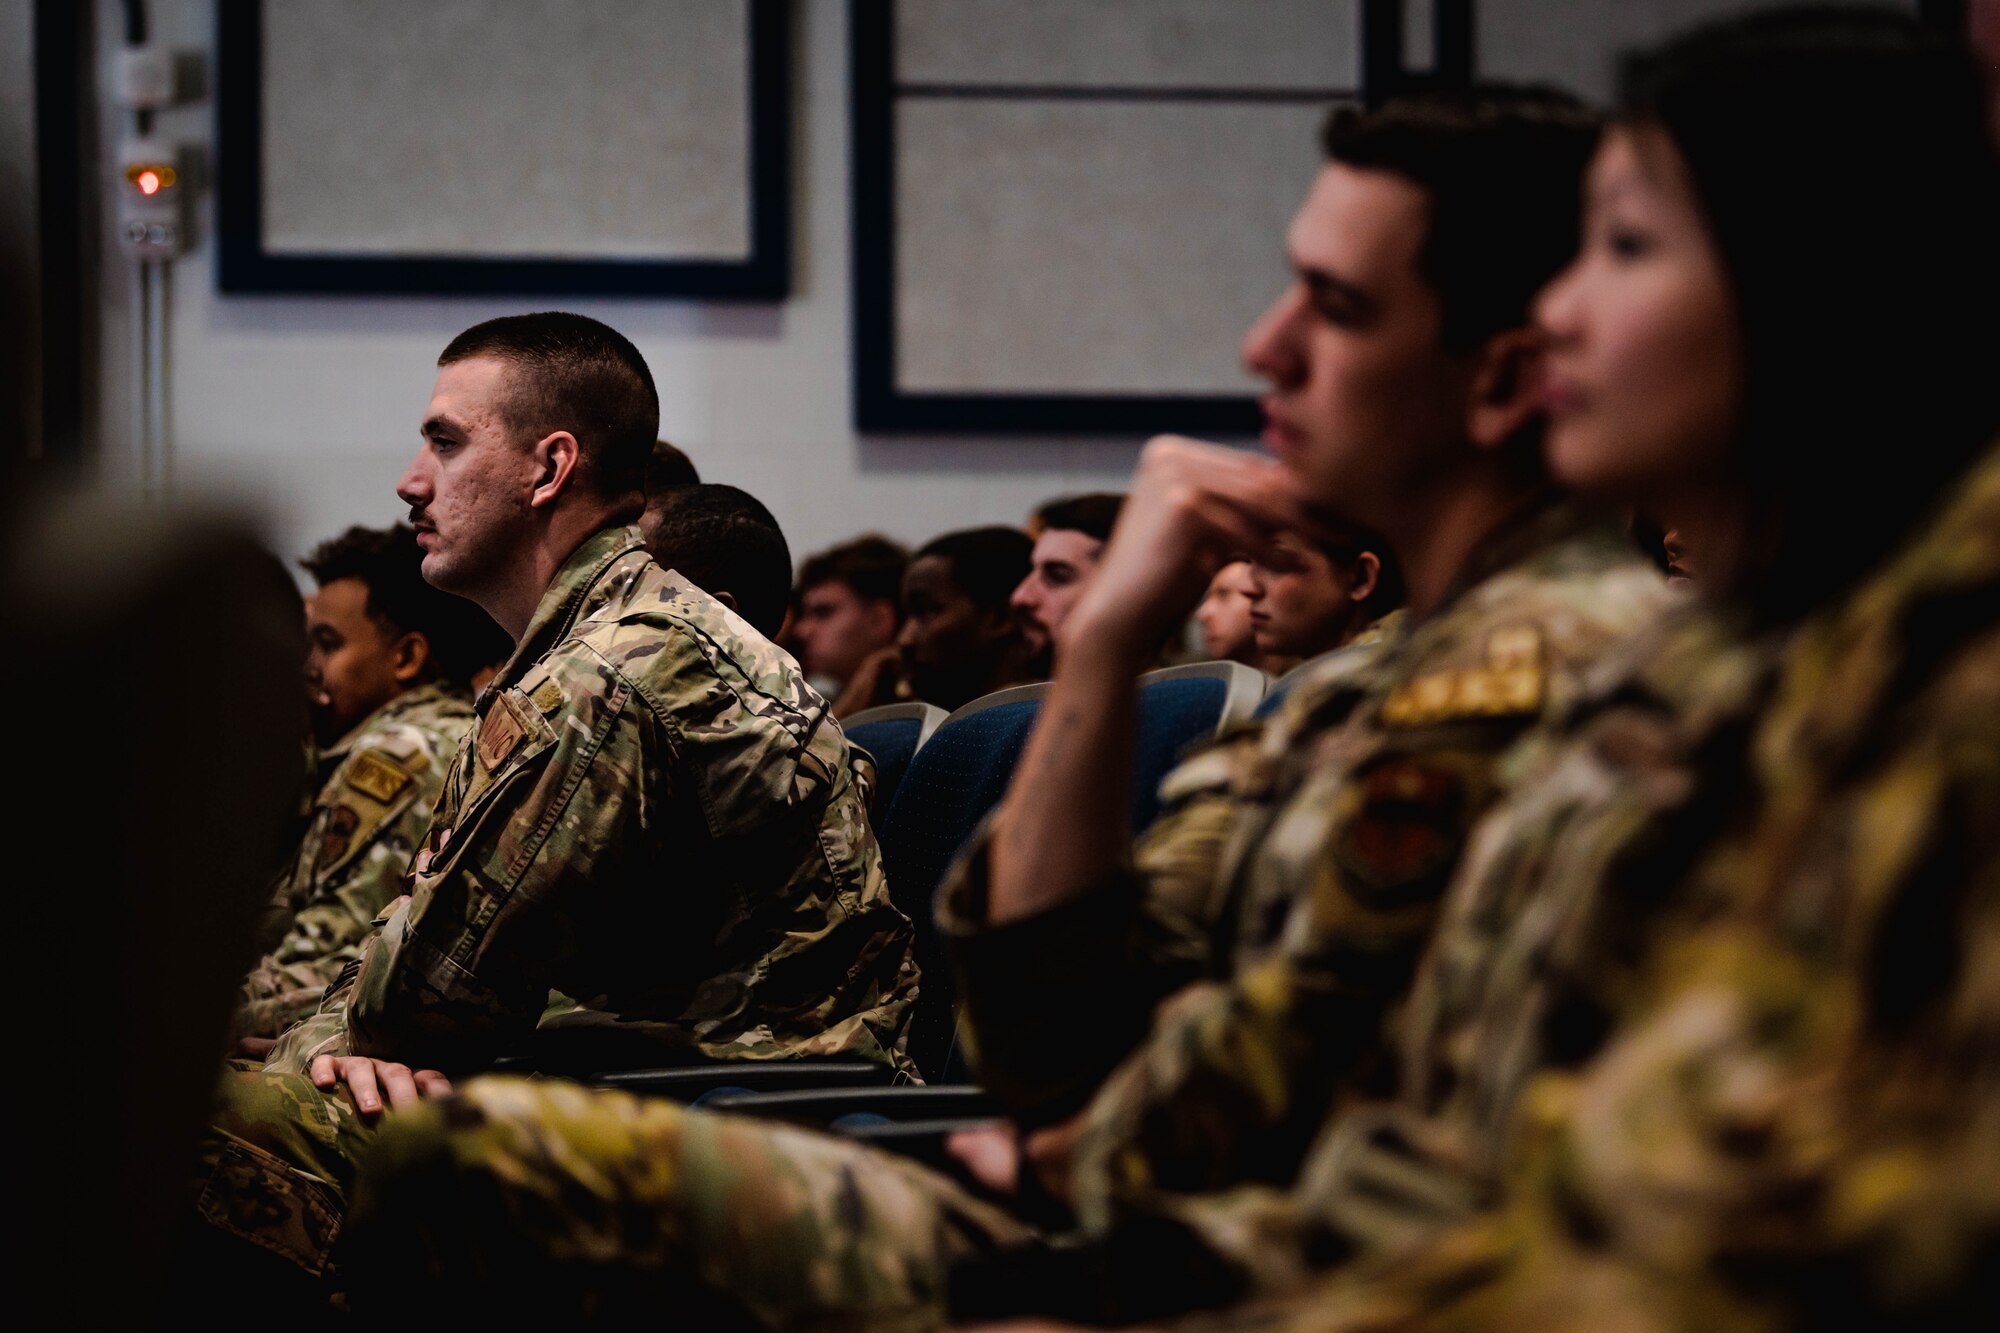 U.S. Air Force Airmen assigned to the 56th Fighter Wing listen to base leadership during a wing-wide all-call.